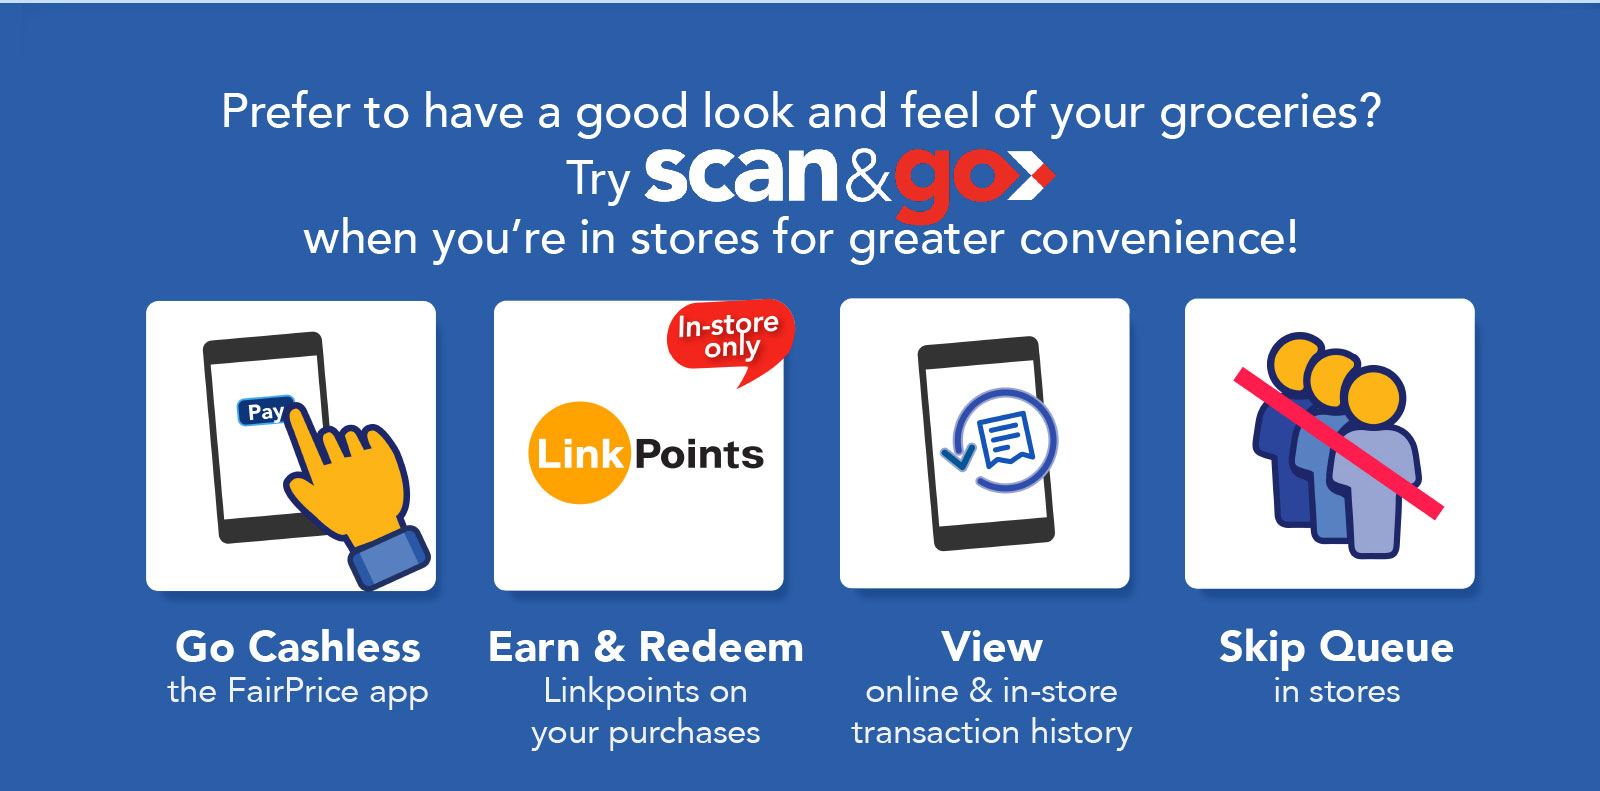 Seniors go digital - Grocery shopping made easy with FairPrice app and Scan & Go